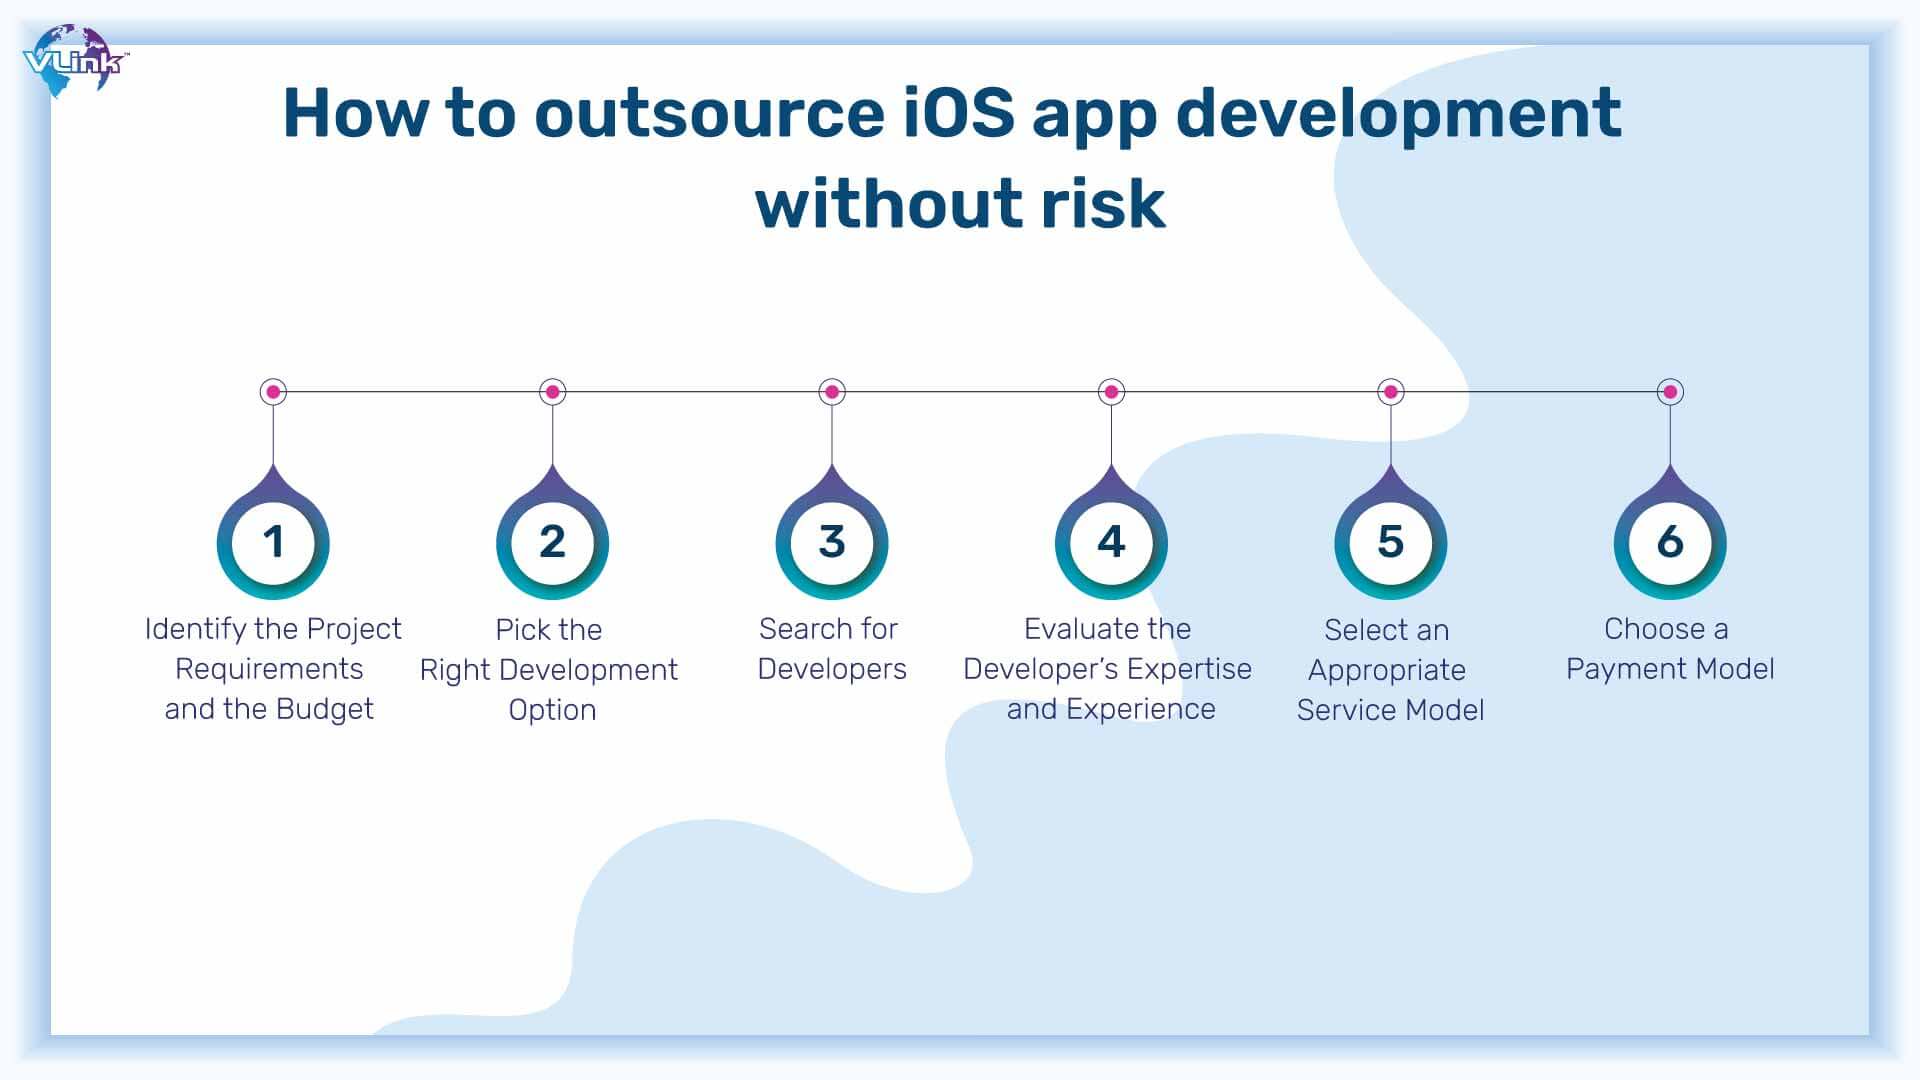 How to Outsource iOS App Development Without any Risk